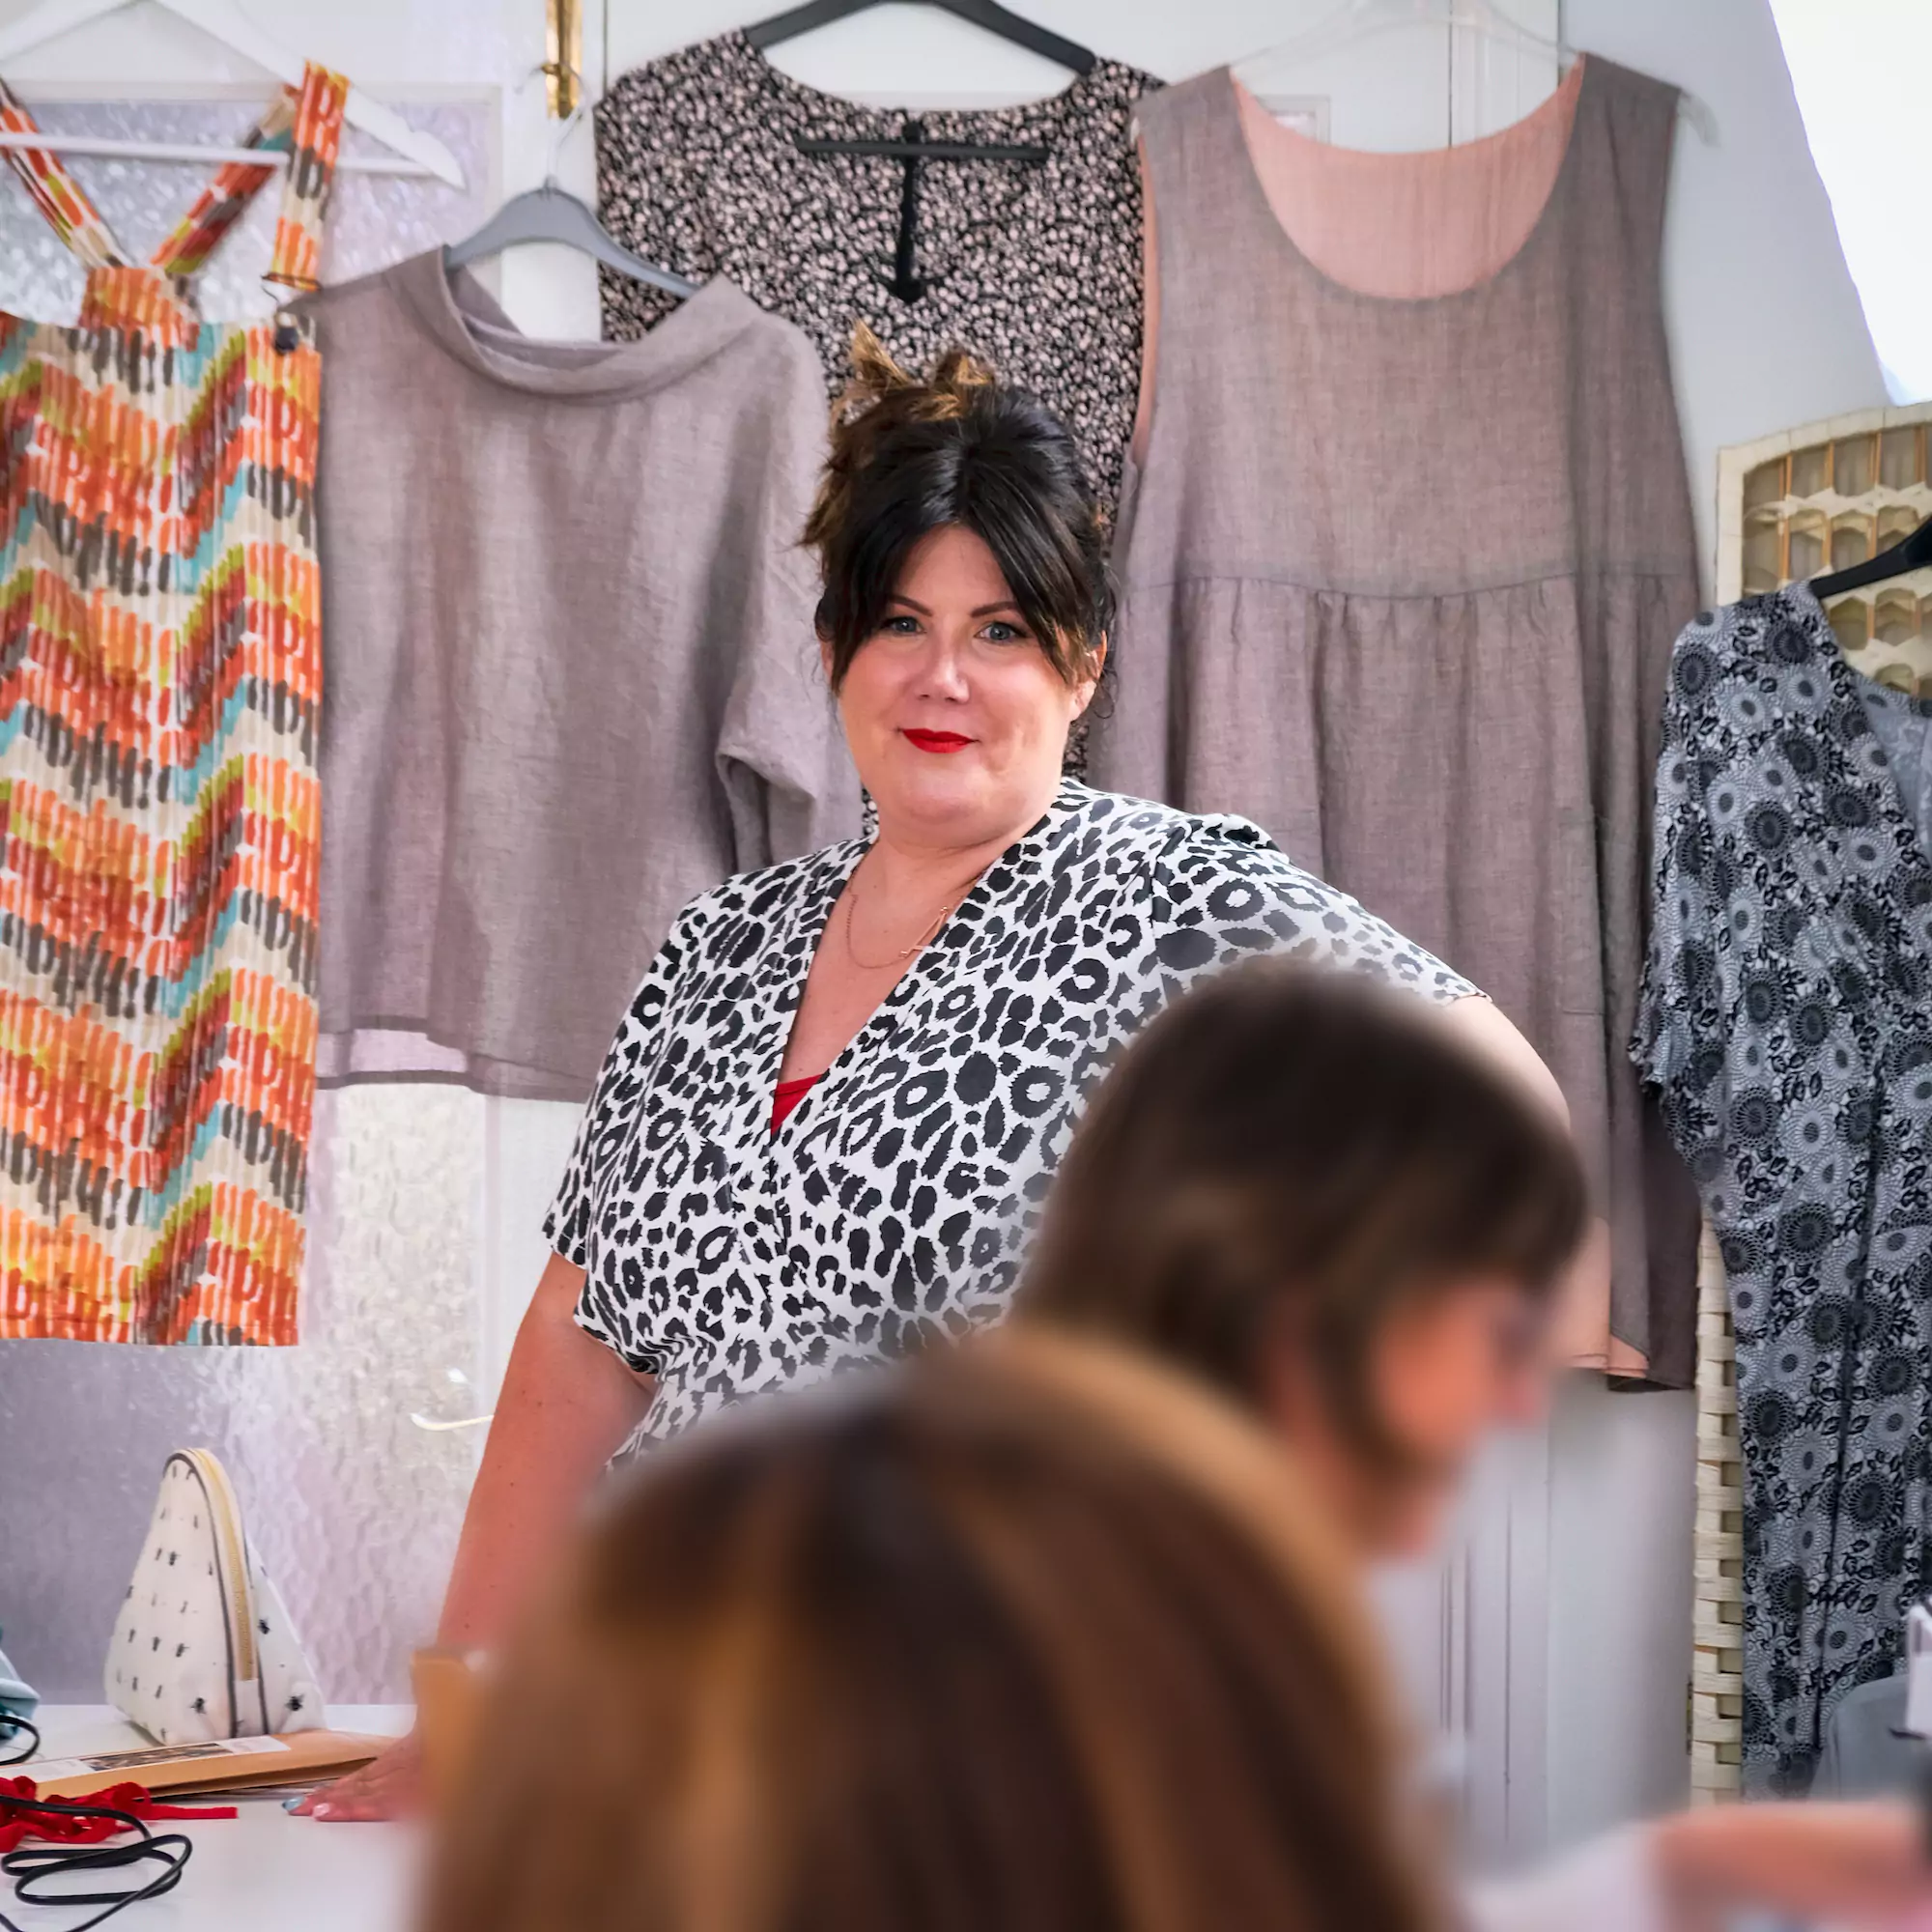 1:1 sewing lessons - learn to sew consultation with Alison Greer